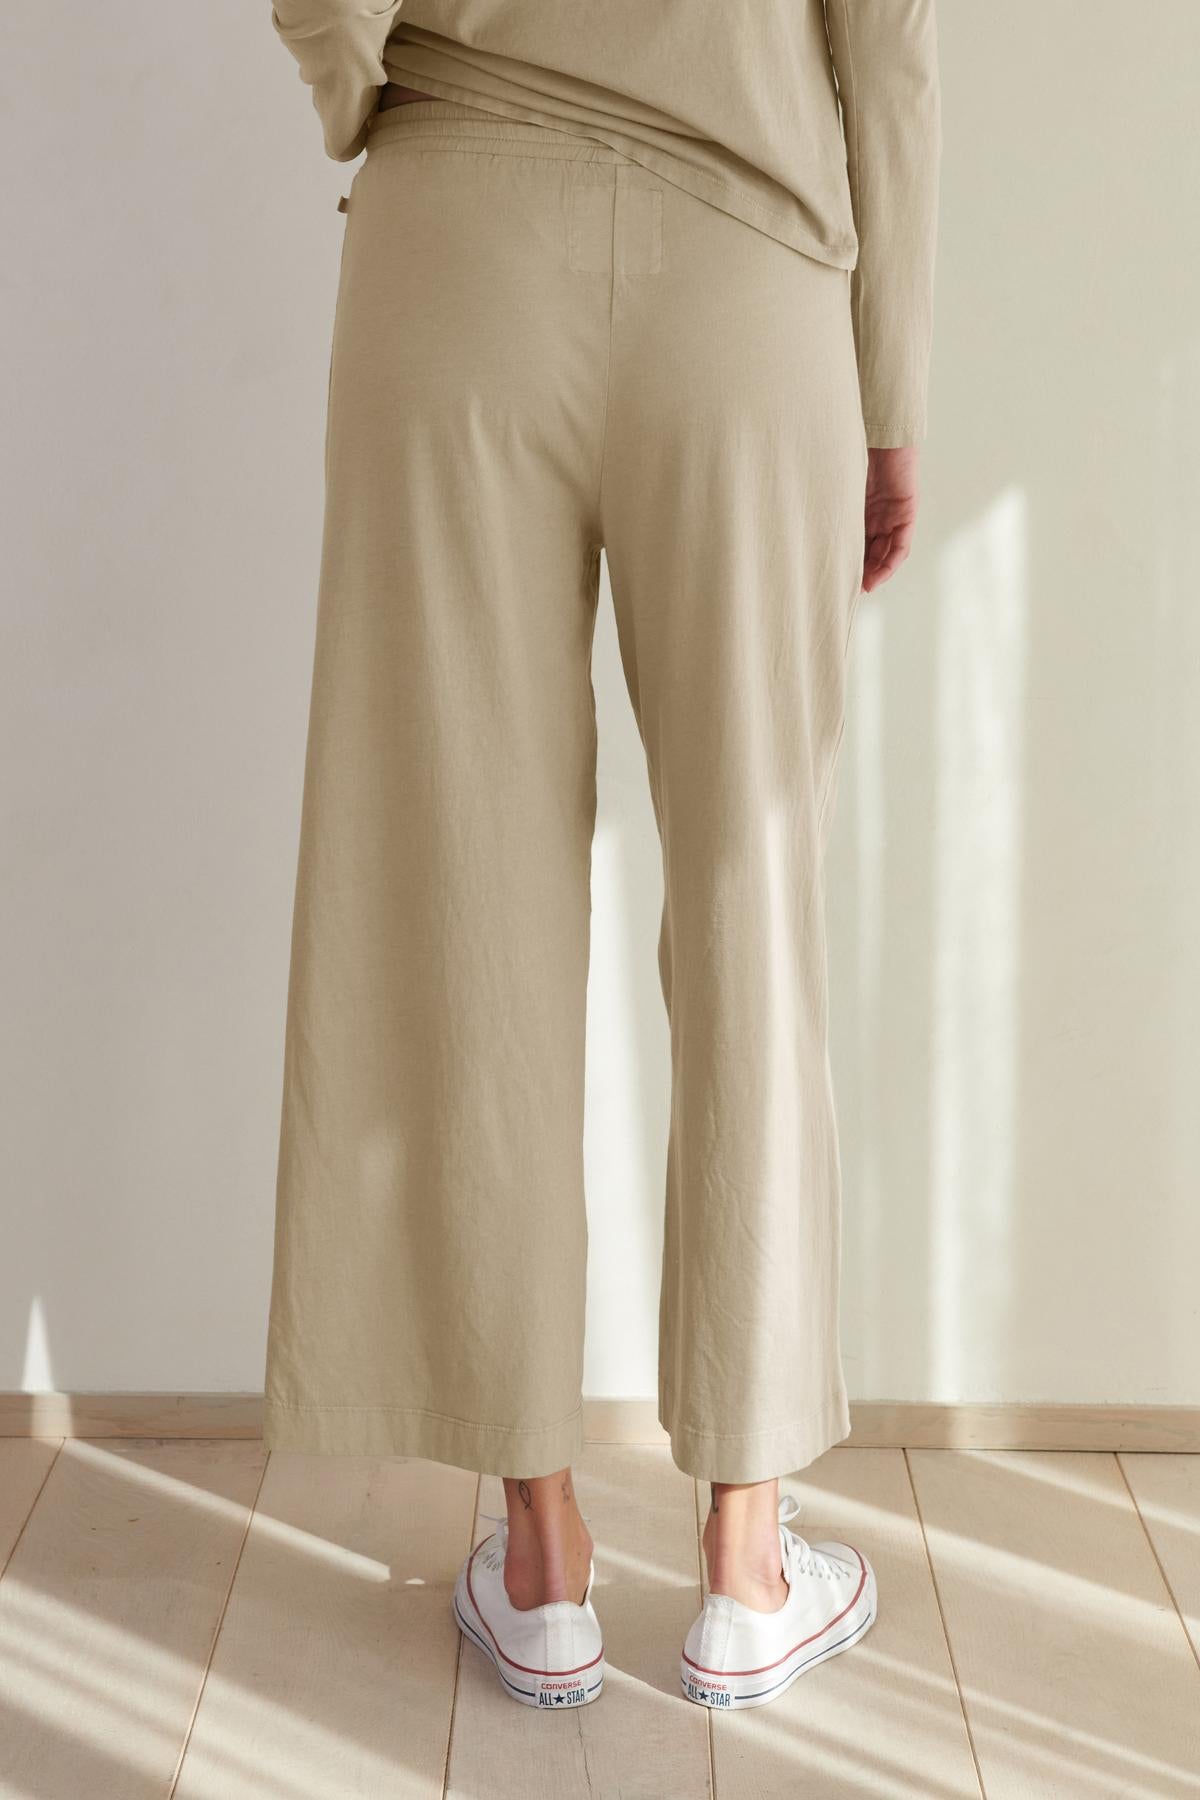   Person standing in a room wearing Velvet by Jenny Graham's PISMO PANT straight leg pants and a matching top with white sneakers. 